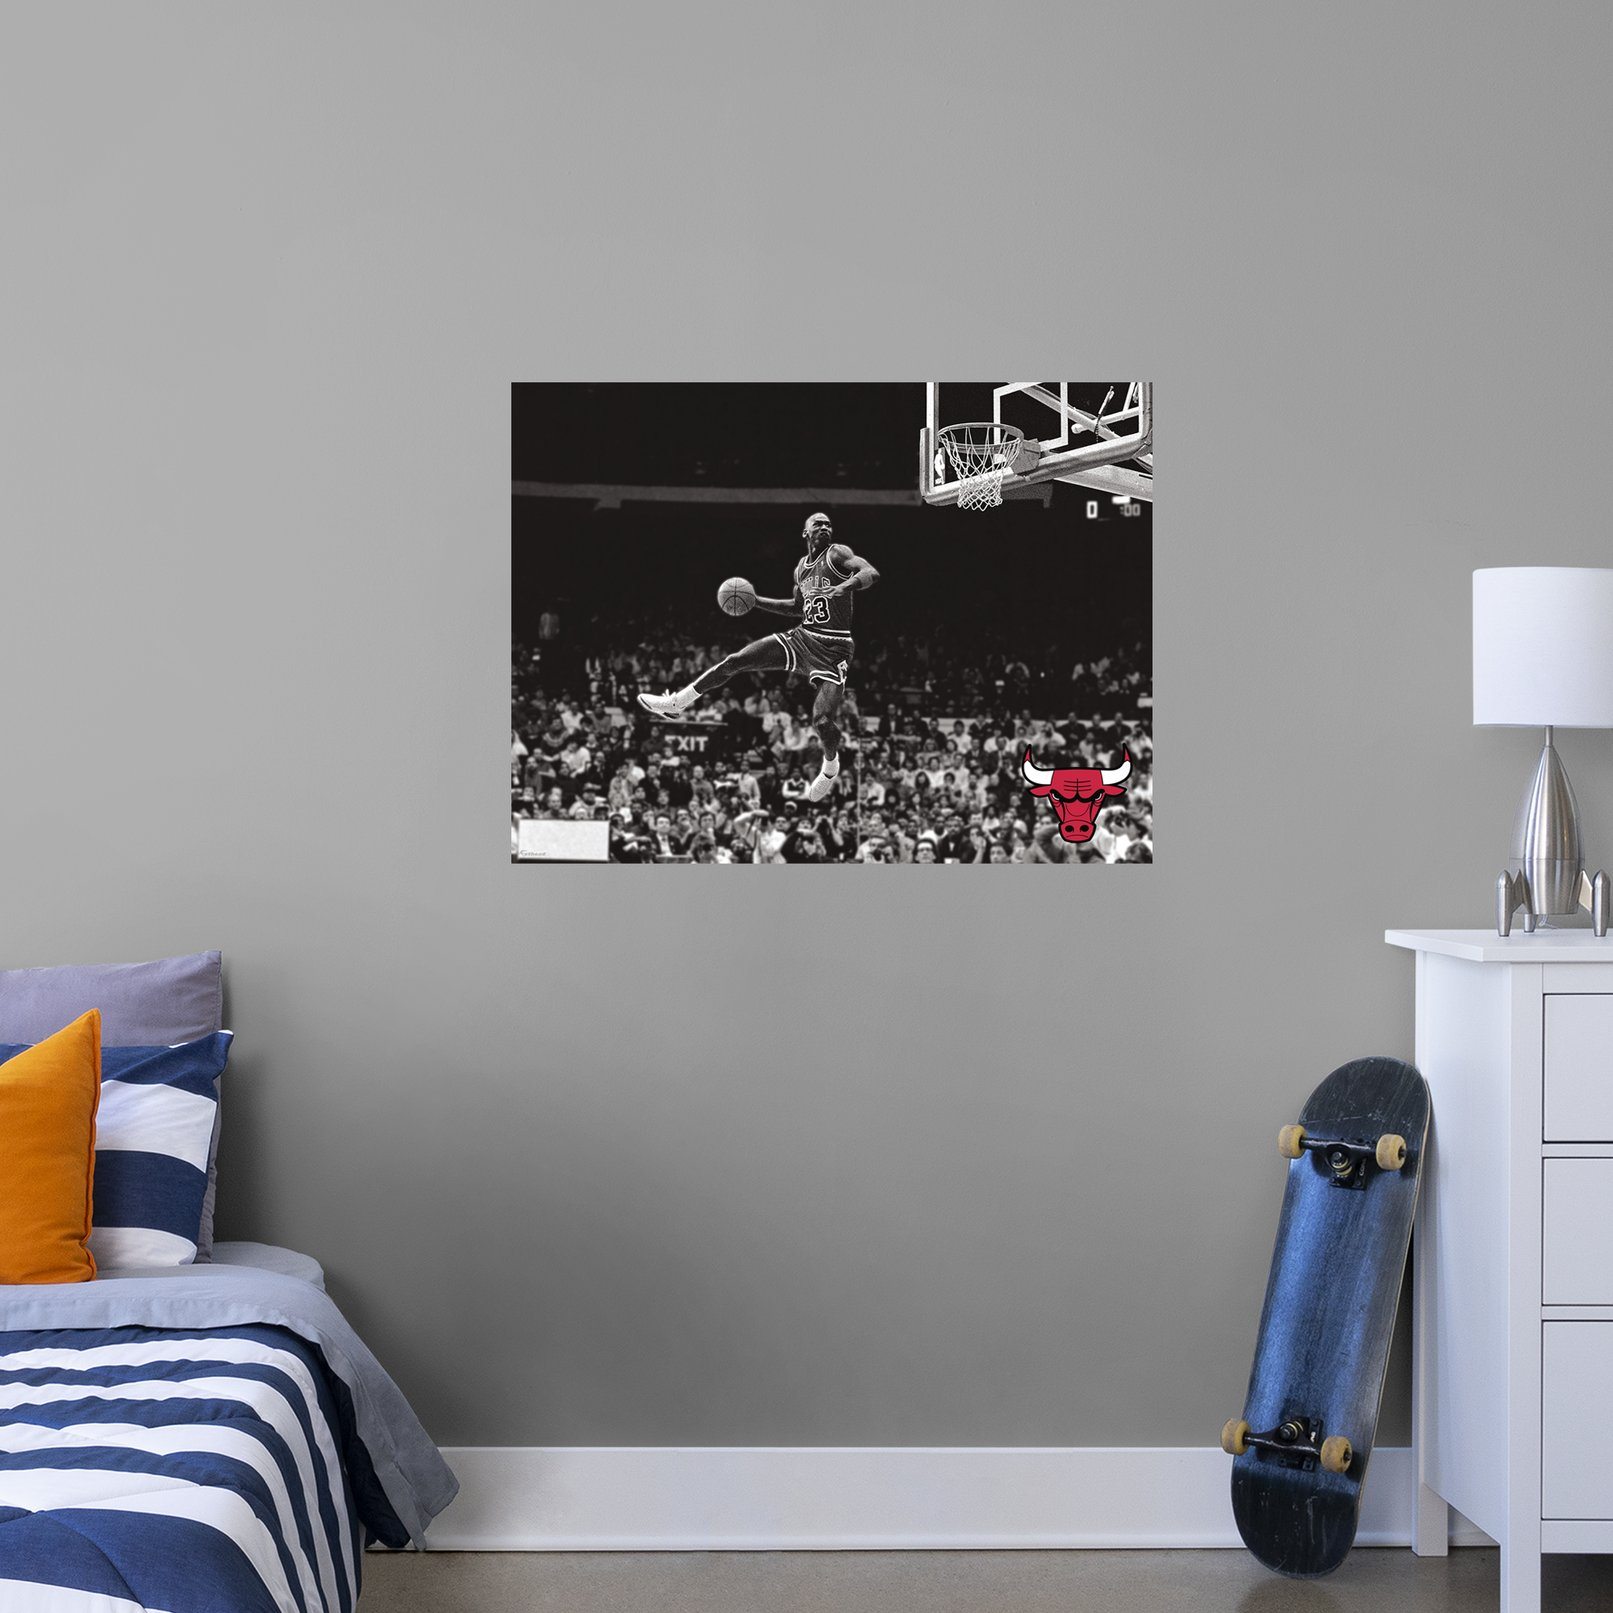 https://fathead.com/collections/sports-stars-homepage/products/1950-00102-003?variant=33467022344280